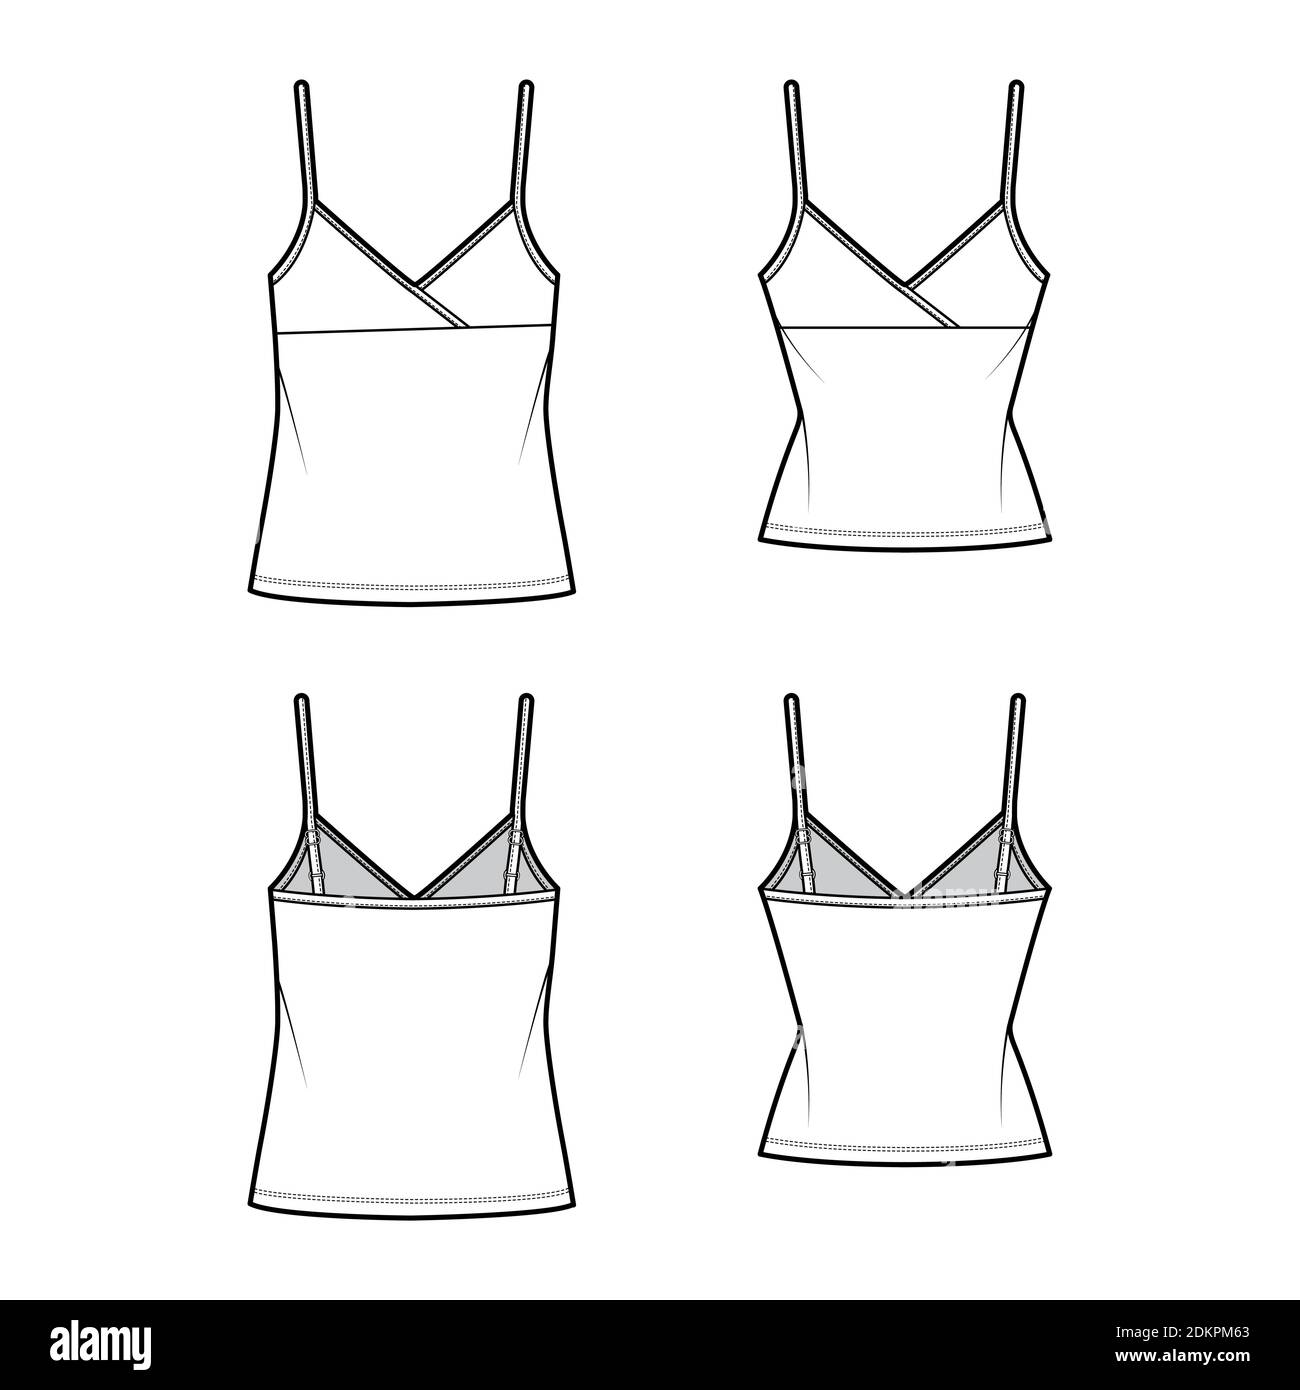 Set of Camisoles surplice tank top technical fashion illustration with ...